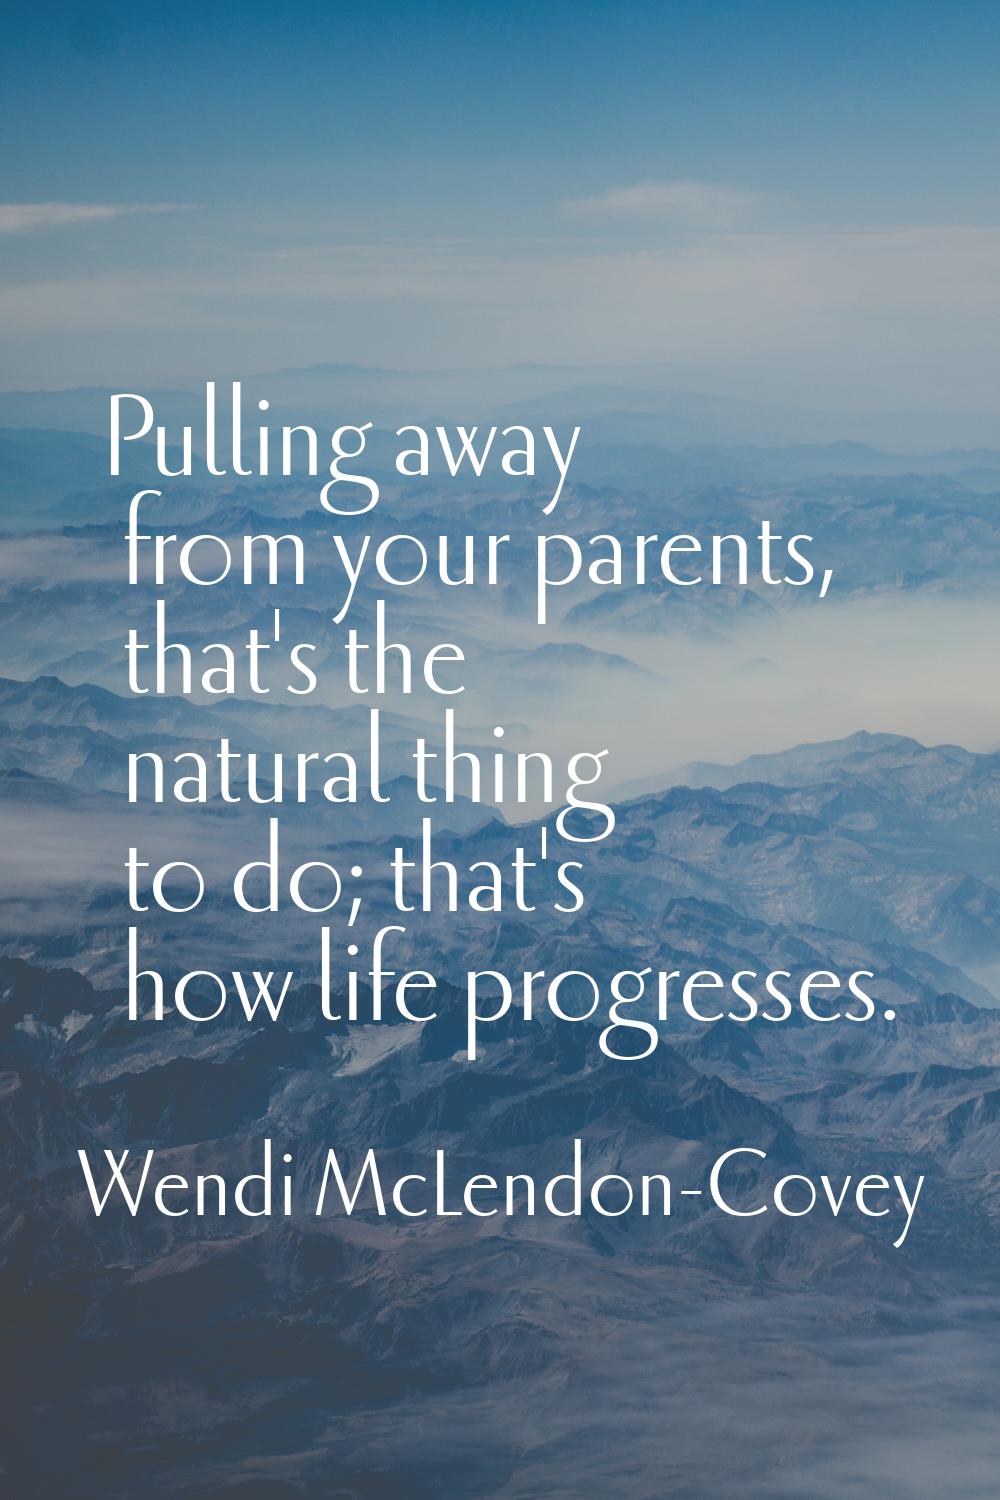 Pulling away from your parents, that's the natural thing to do; that's how life progresses.